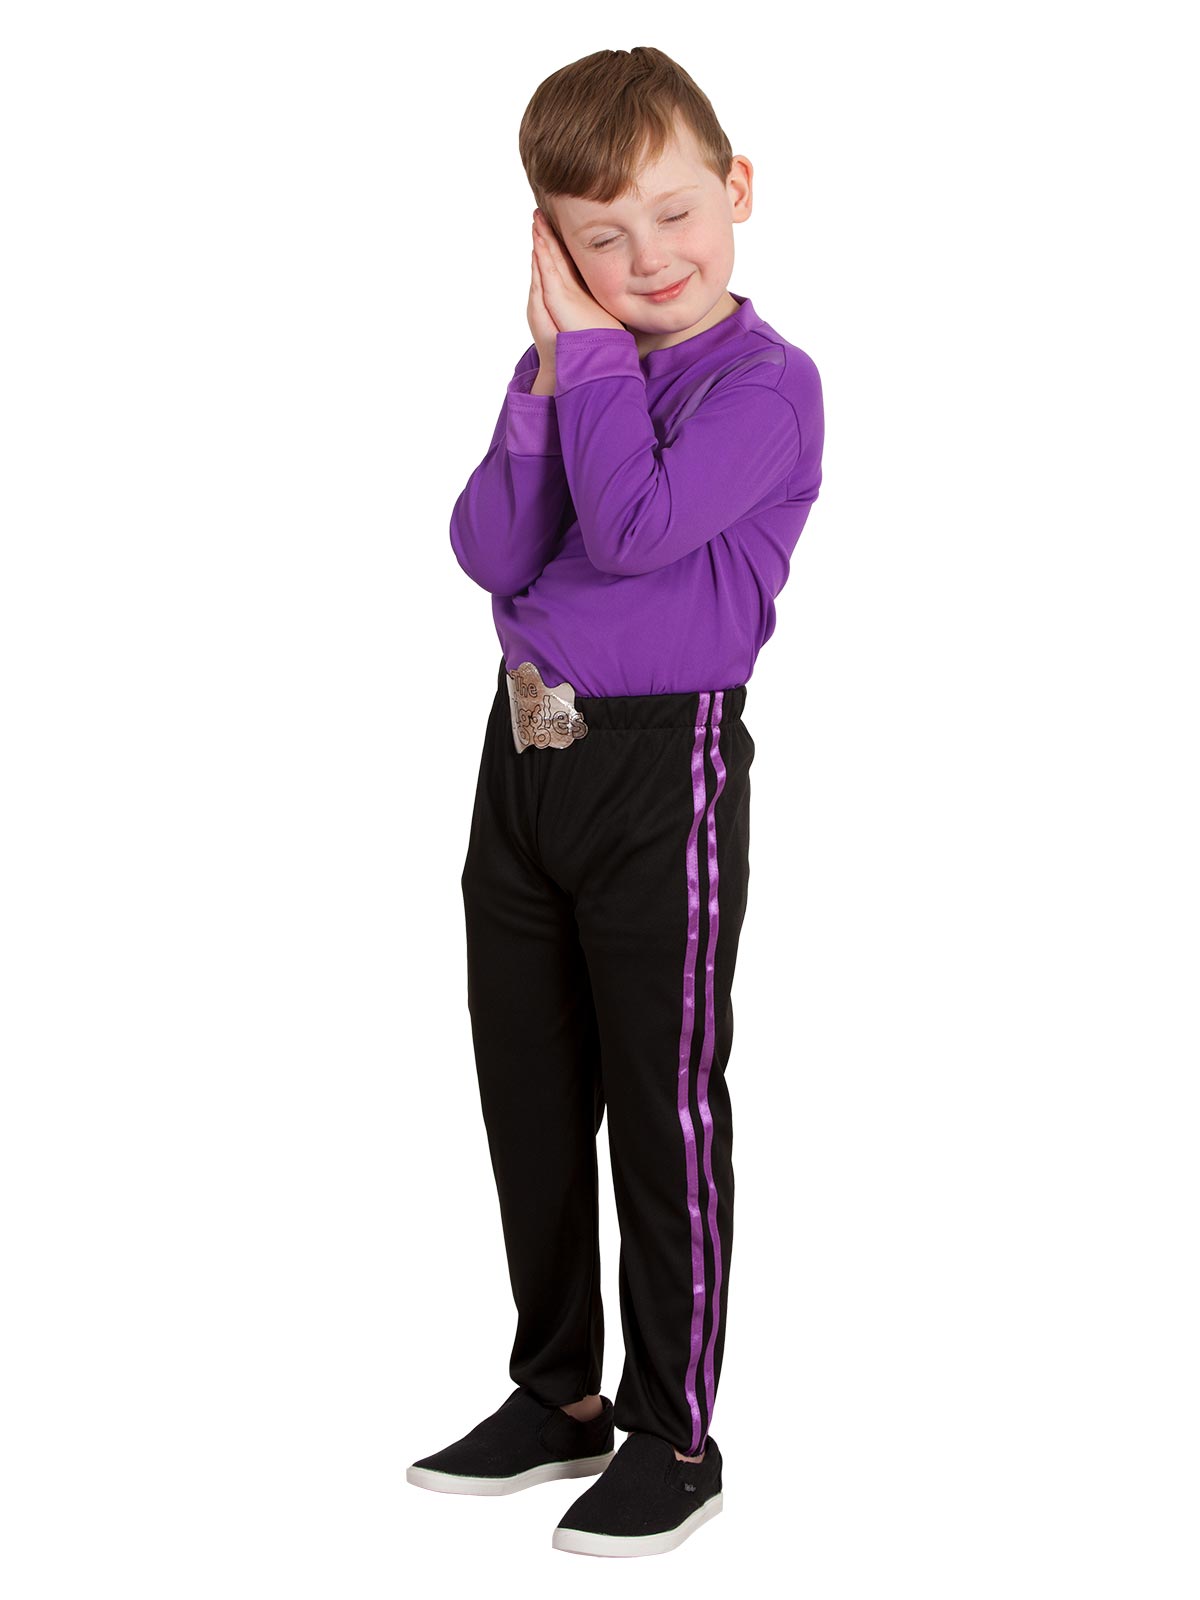 The Wiggles Lachy Kids Costume